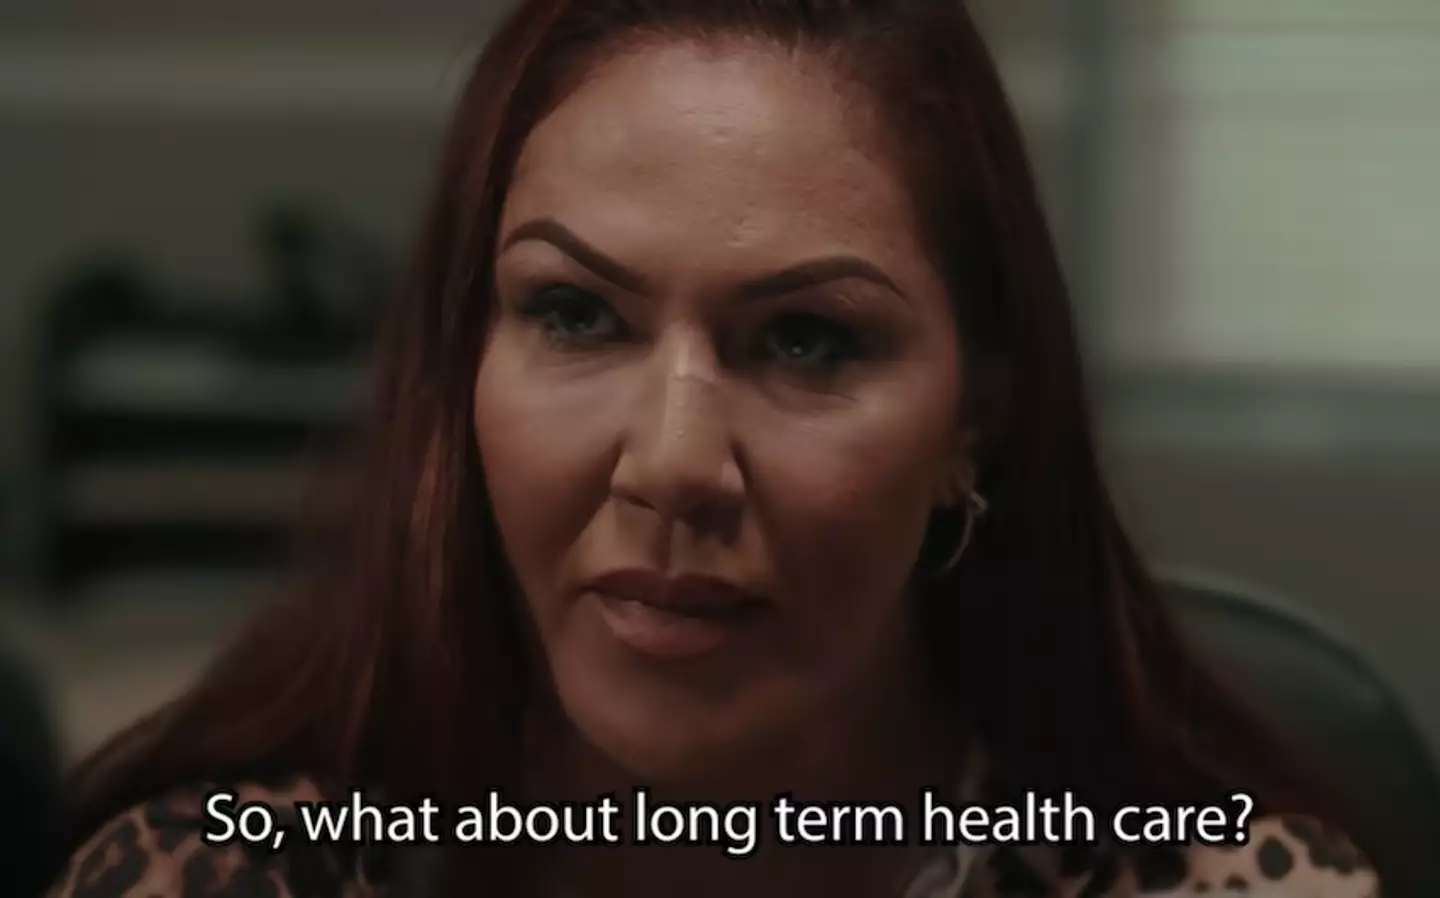 UFC champ Cris Cyborg features in the music video.